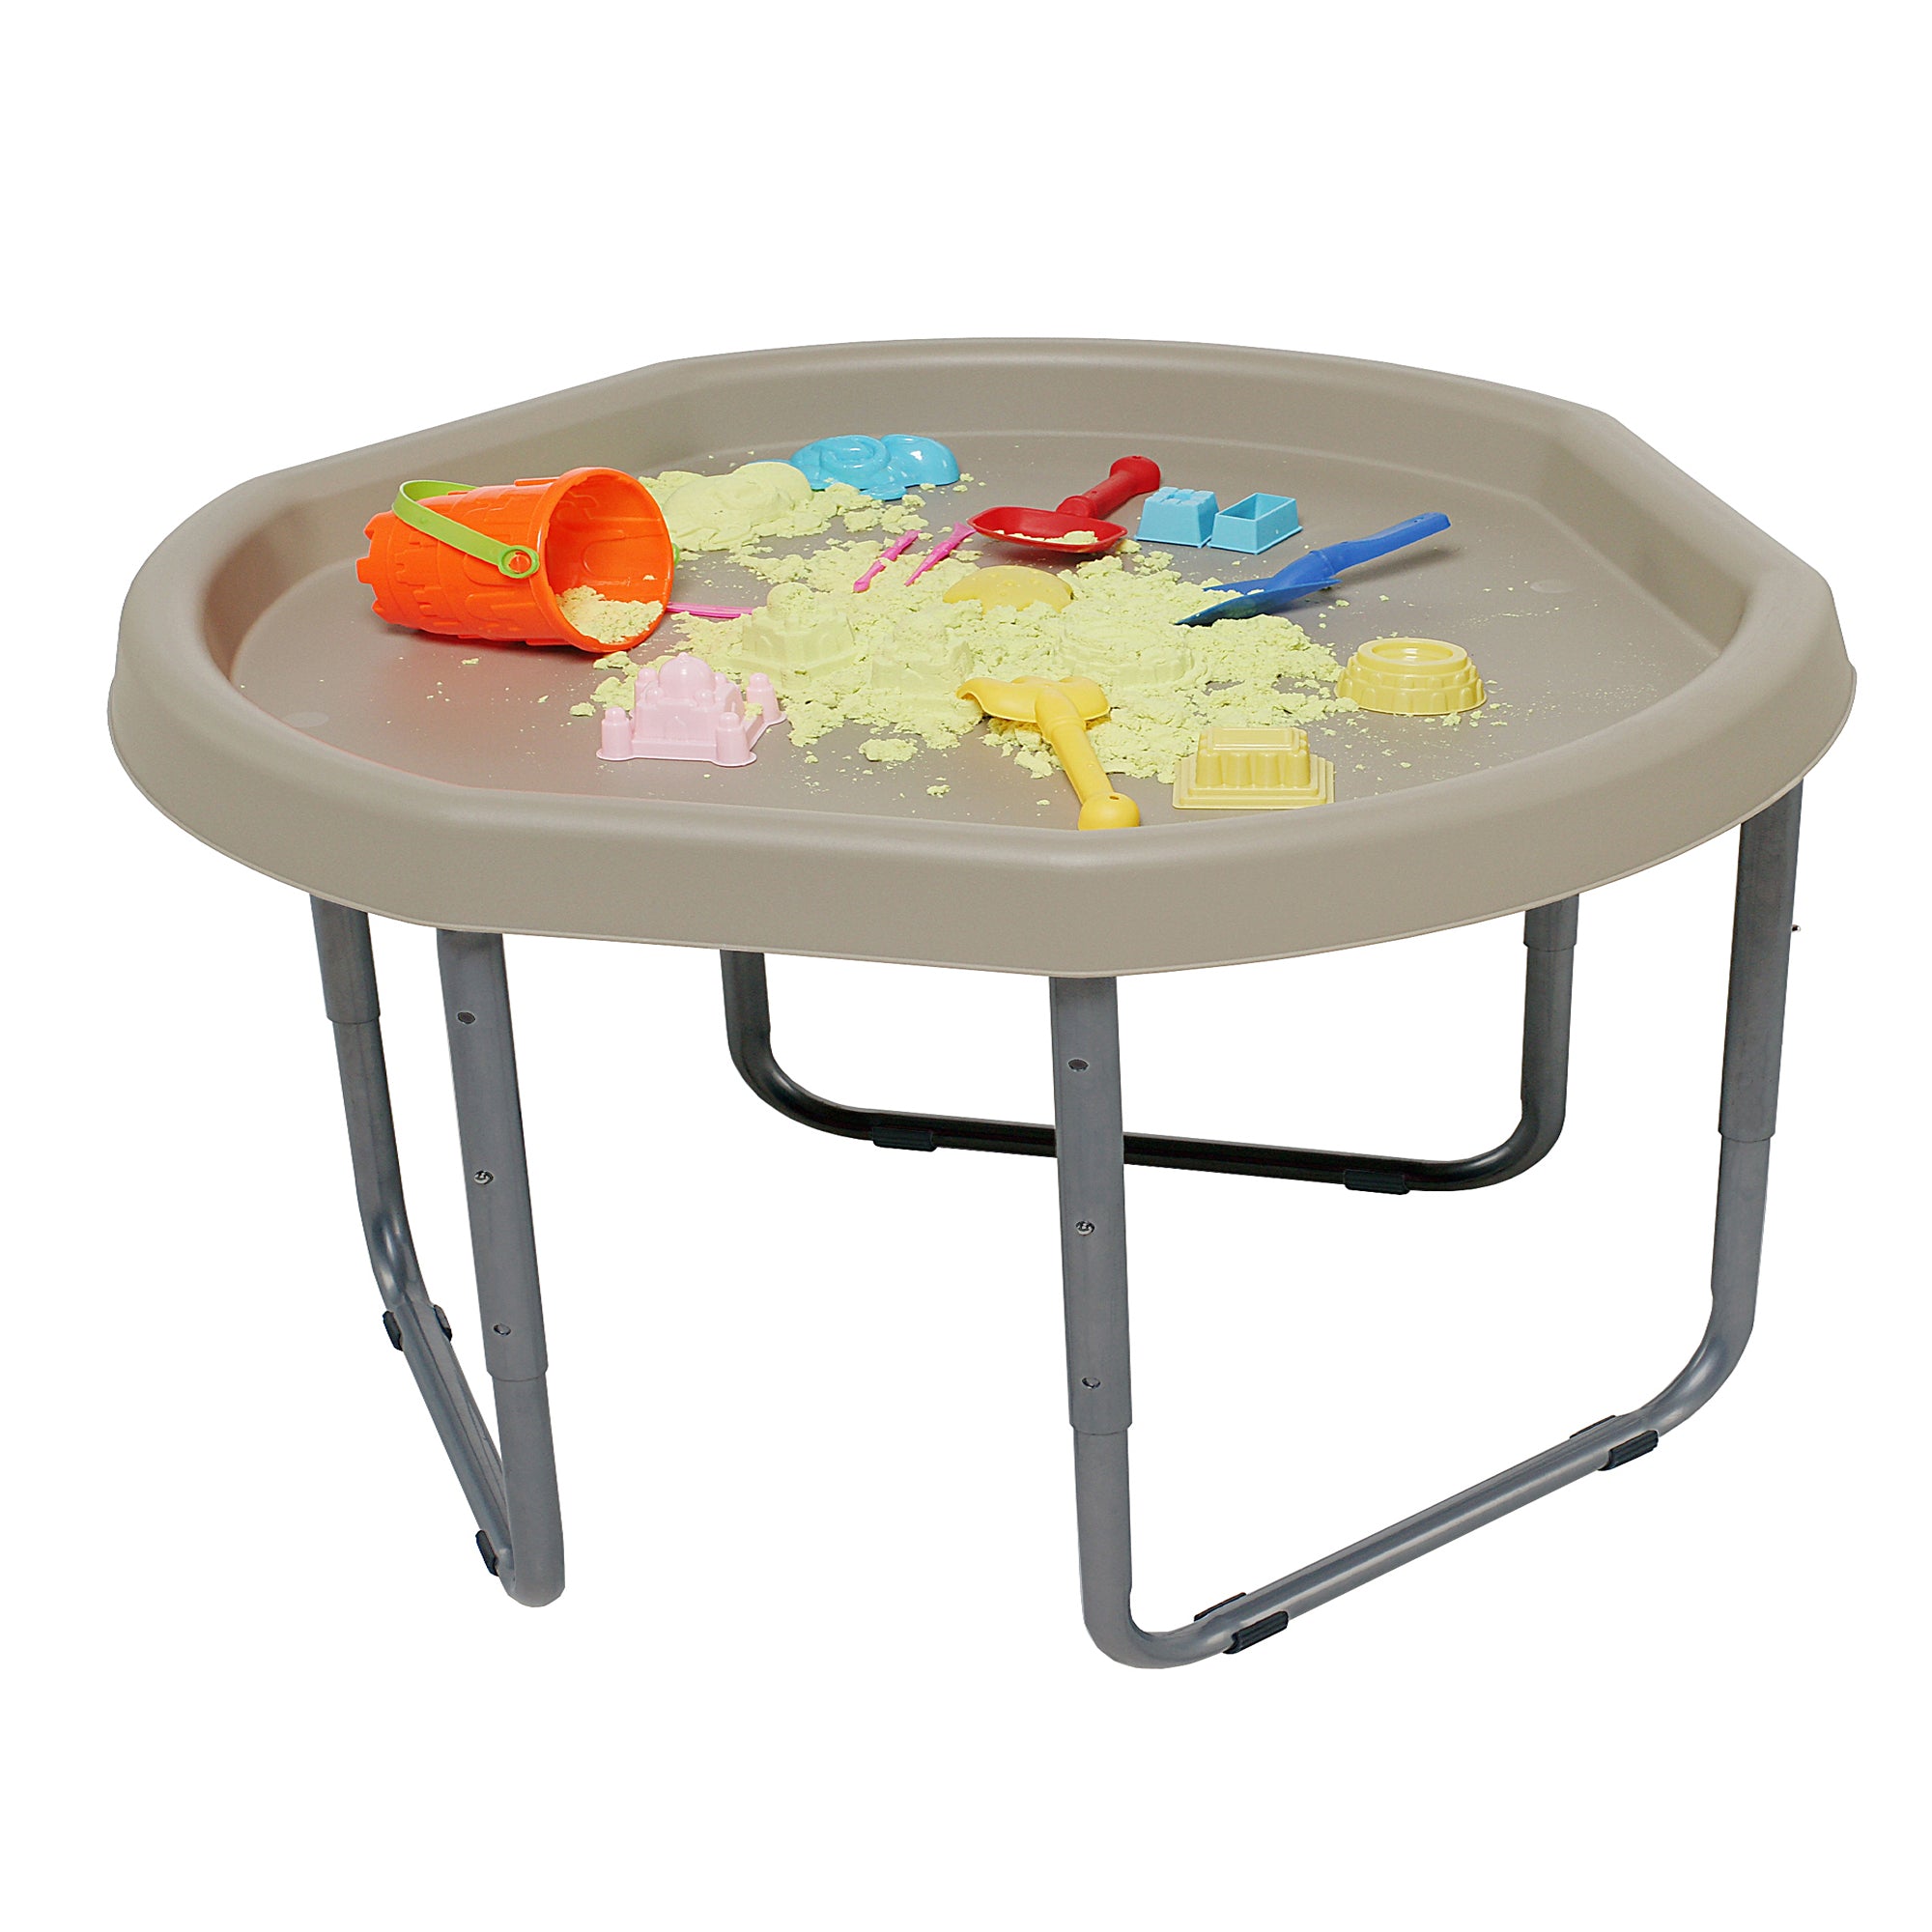 XL Hexacle Tuff Tray & Stand 90cm - 6 Colour Options